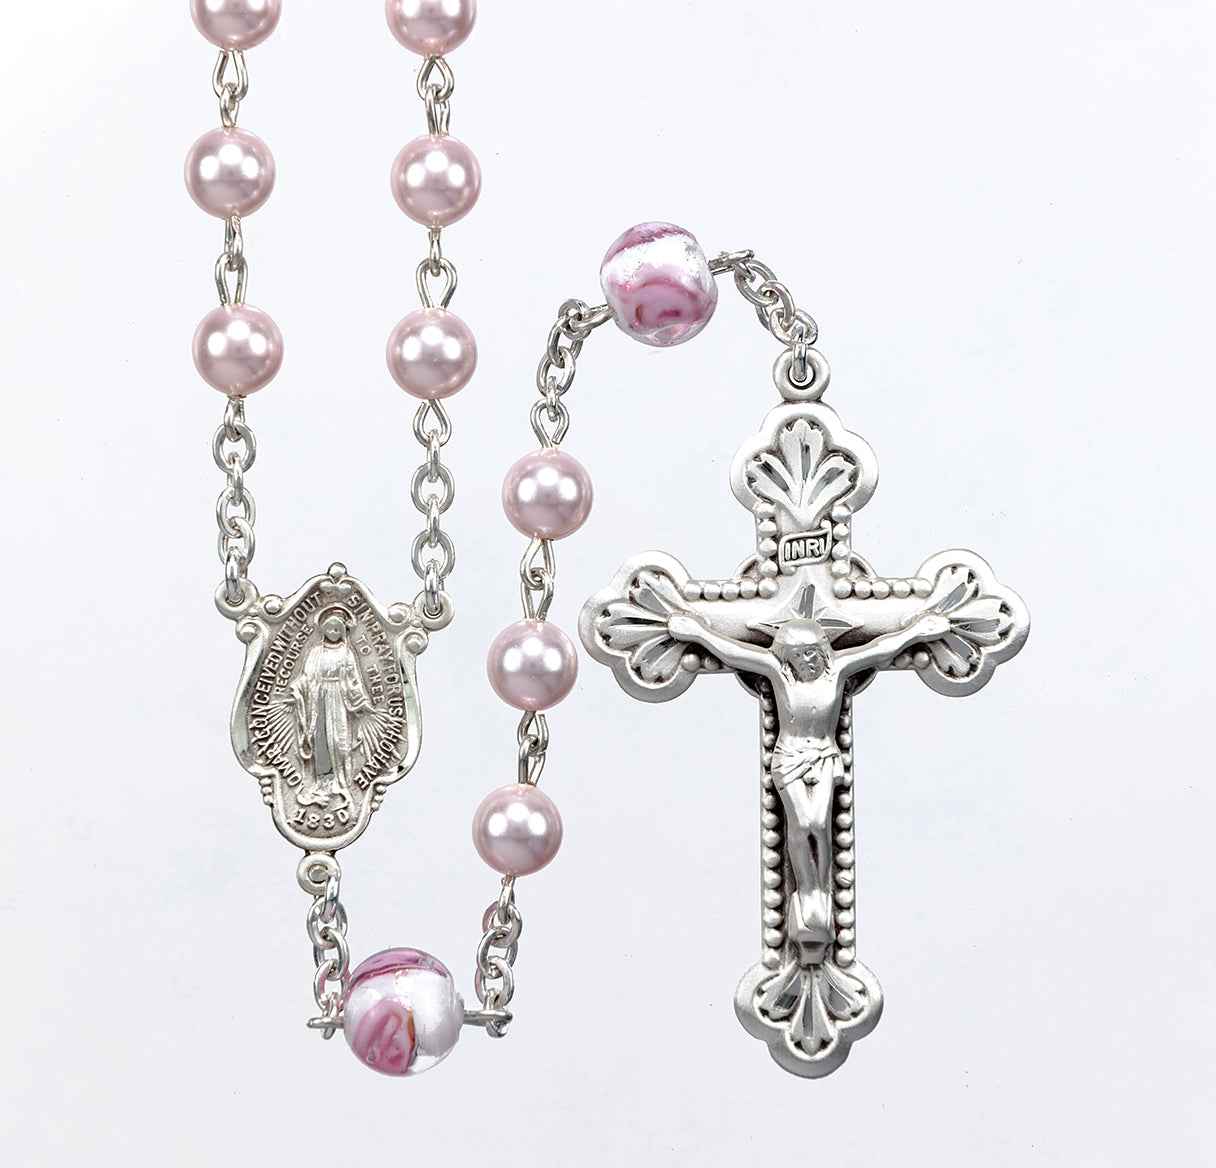 Sterling Silver Rosary Hand Made with Swarovski Crystal 6mm Pink Pearl Beads by HMH